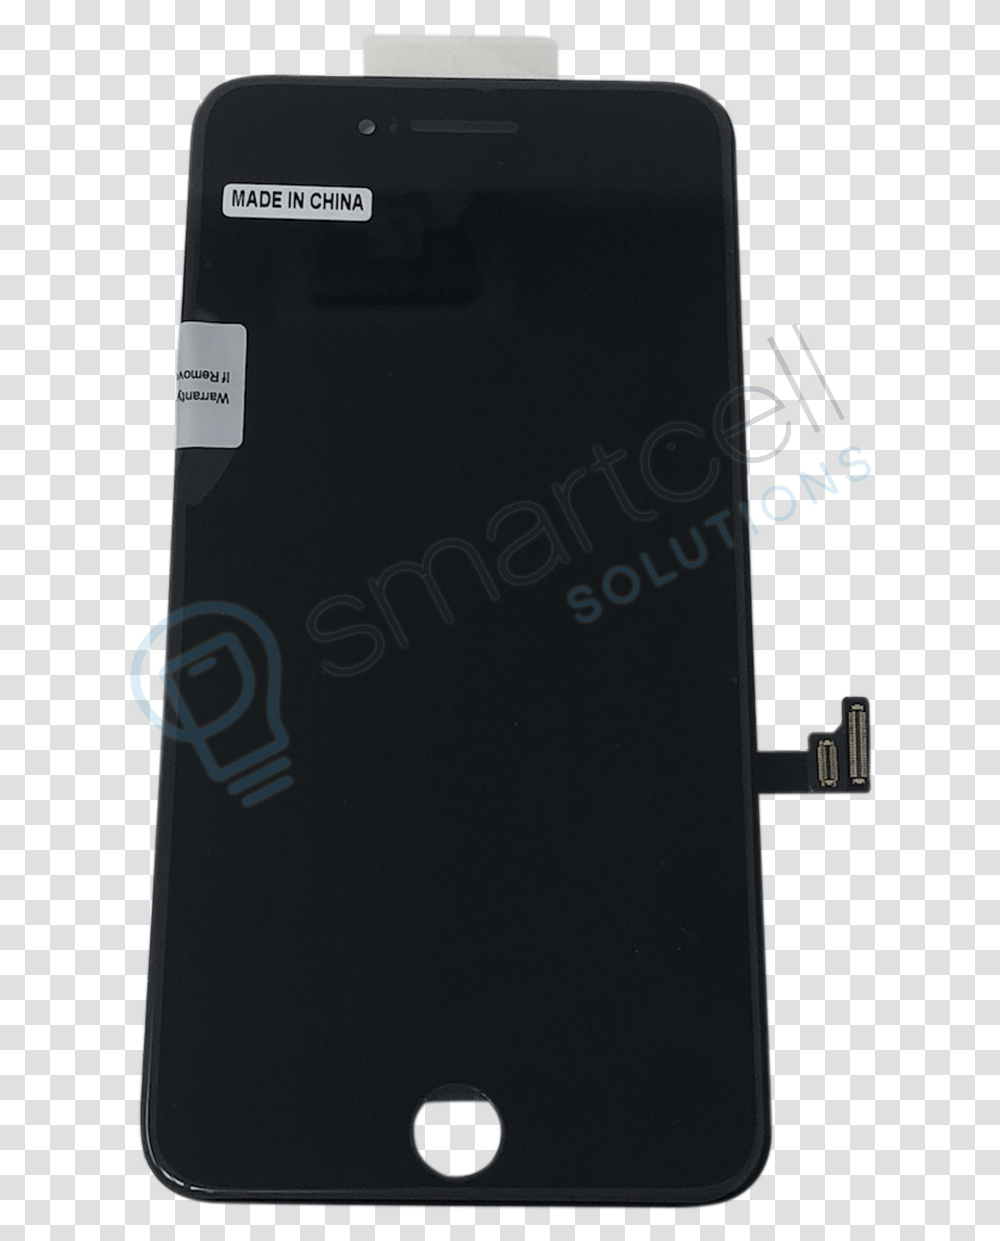 Download Lcd Digitizer Frame Assembly For Iphone 8 Plus Smartphone, Mobile Phone, Electronics, Cell Phone, Text Transparent Png